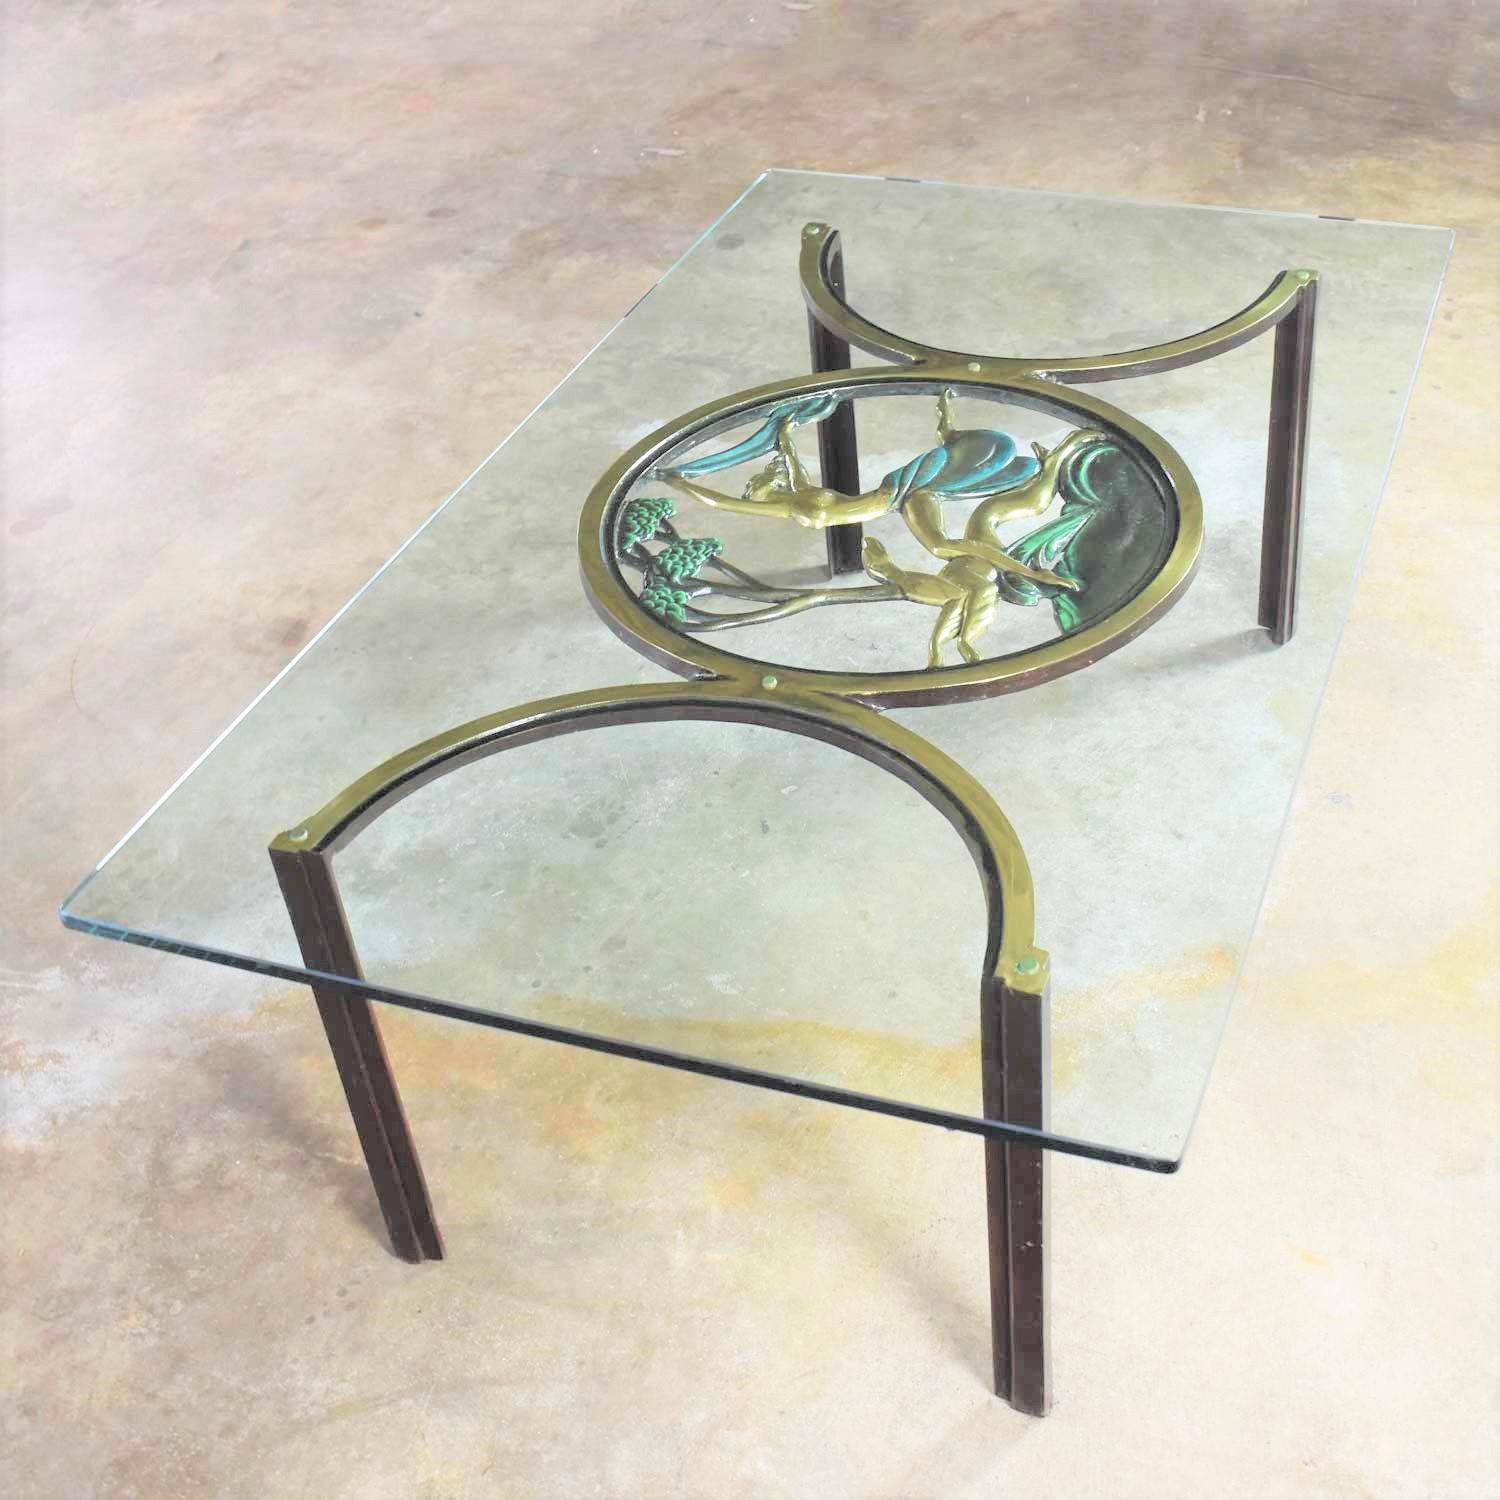 20th Century Art Deco Style Bronze Coffee Table with Diana the Huntress Medallion & Glass Top